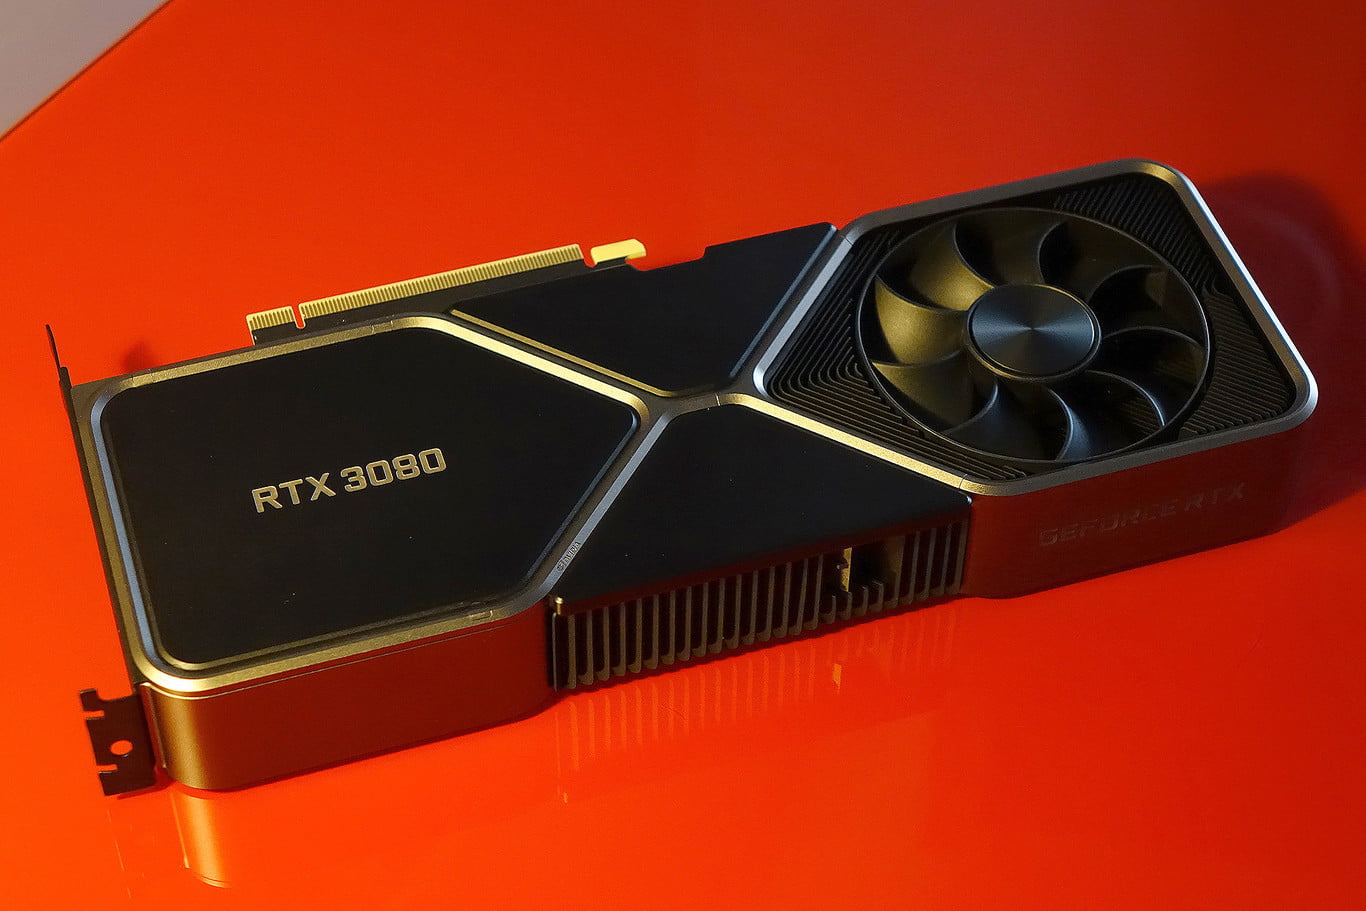 NVIDIA GeForce RTX 3080 full specifications